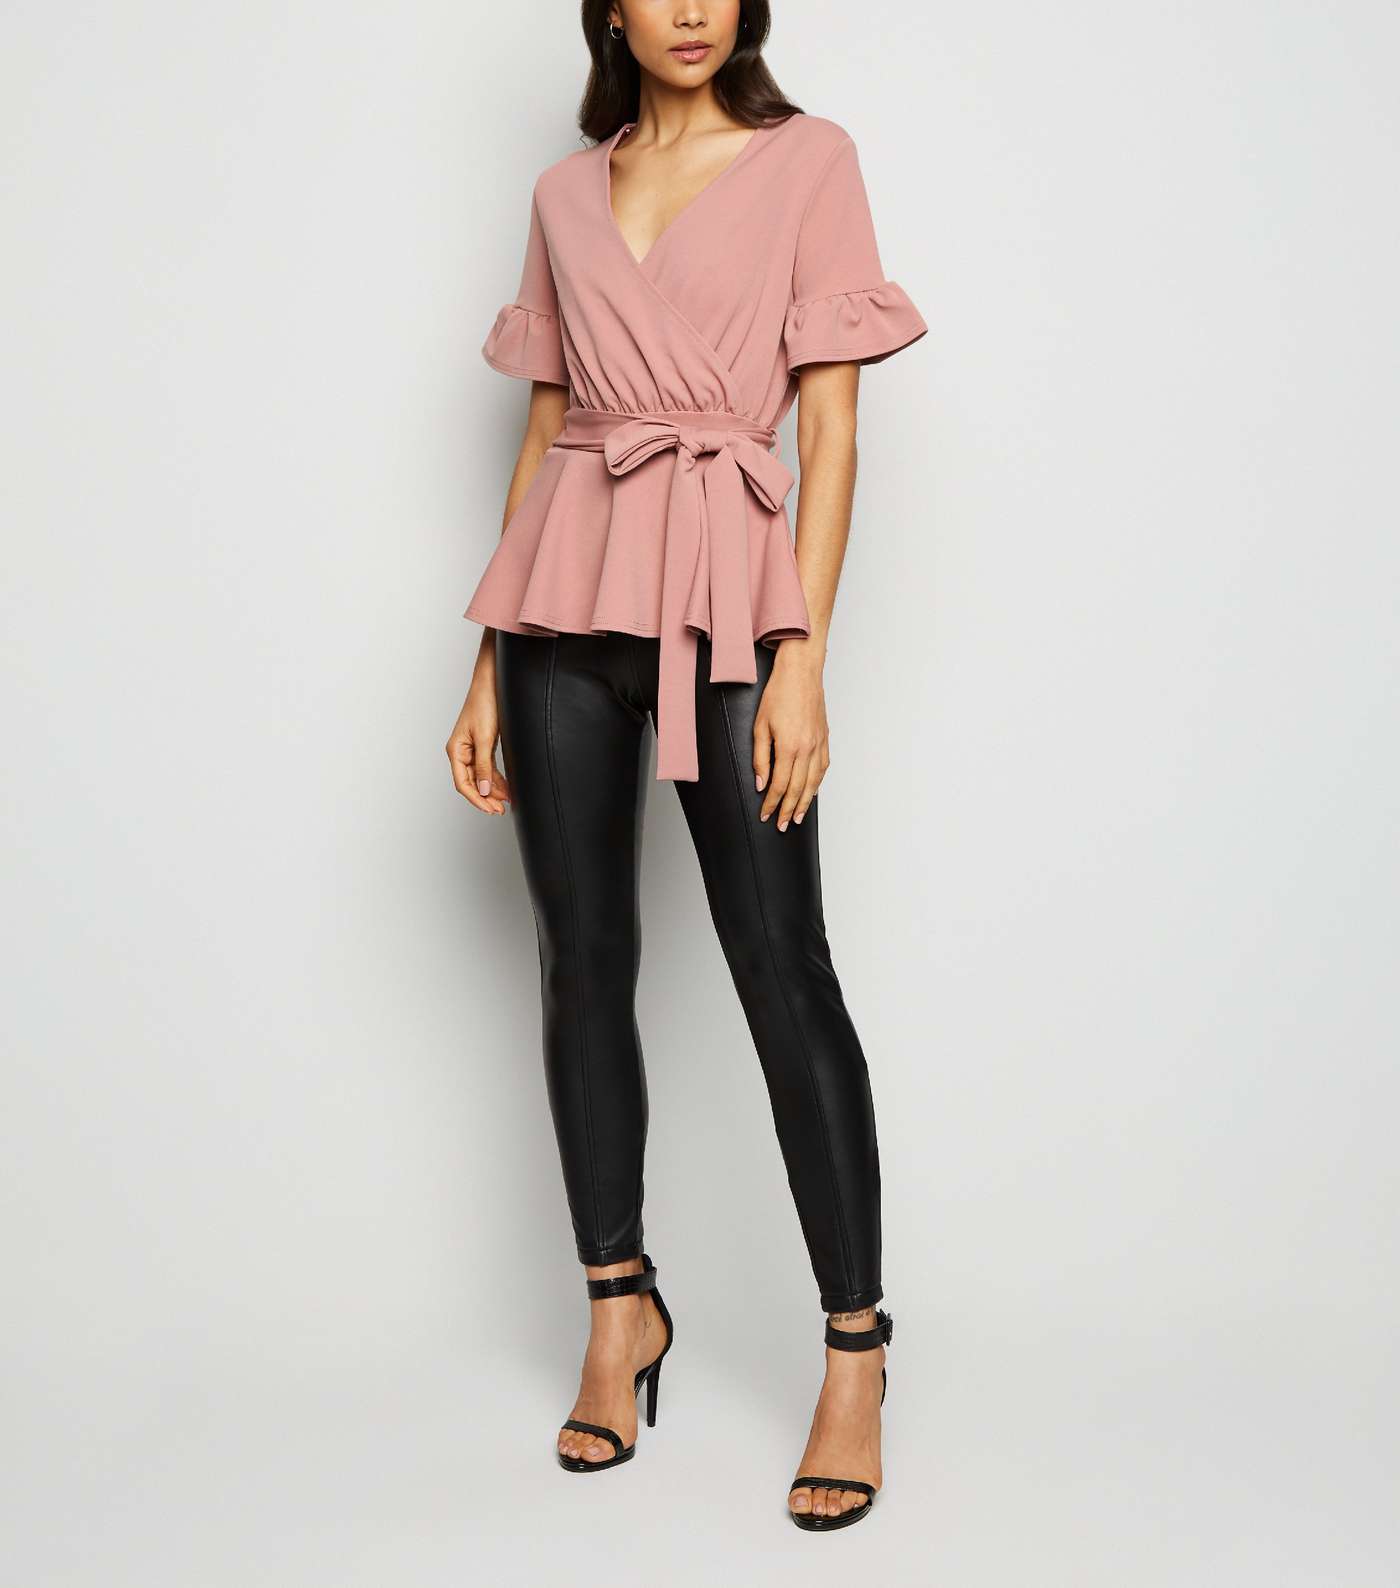 Pale Pink Belted Peplum Top Image 2